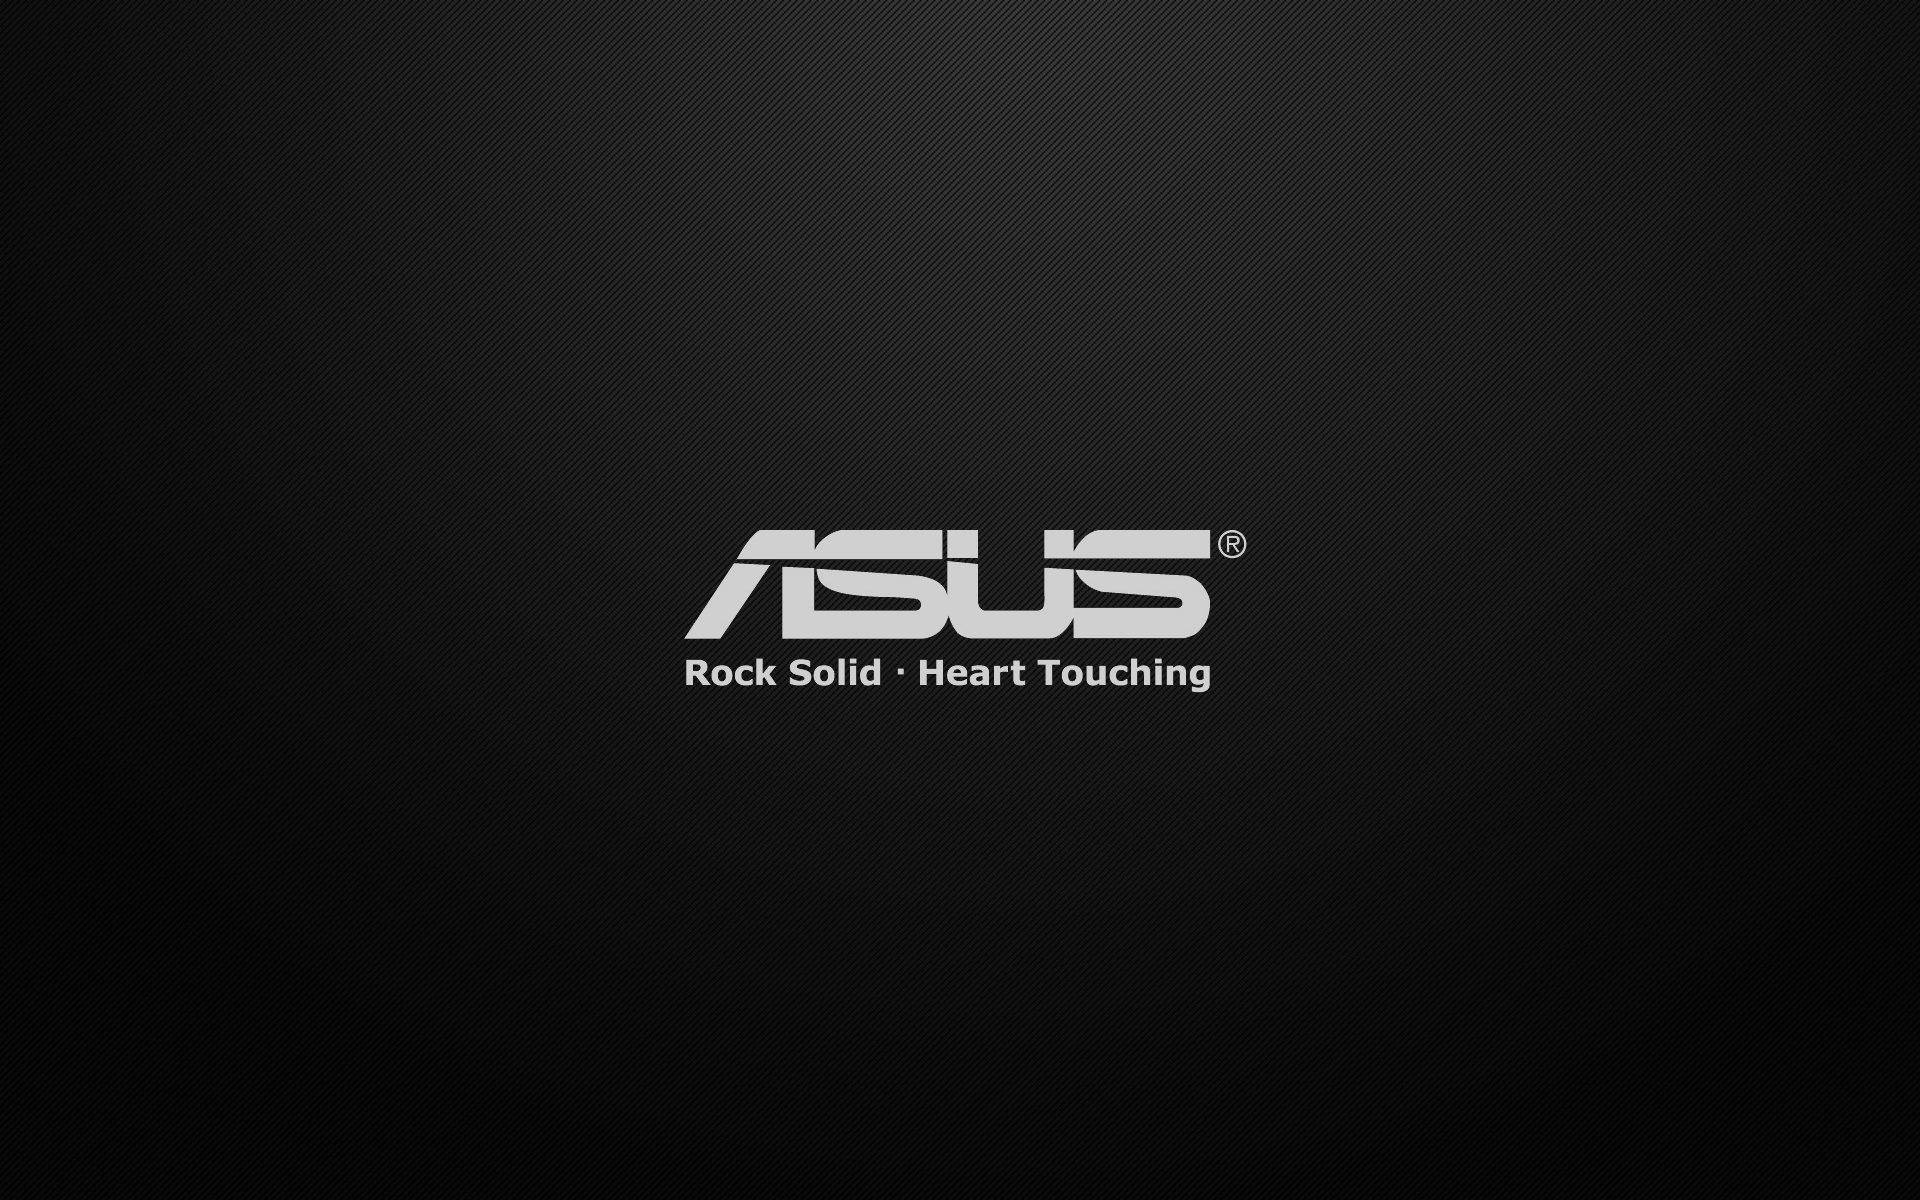 Asus Text Logo Hd Background